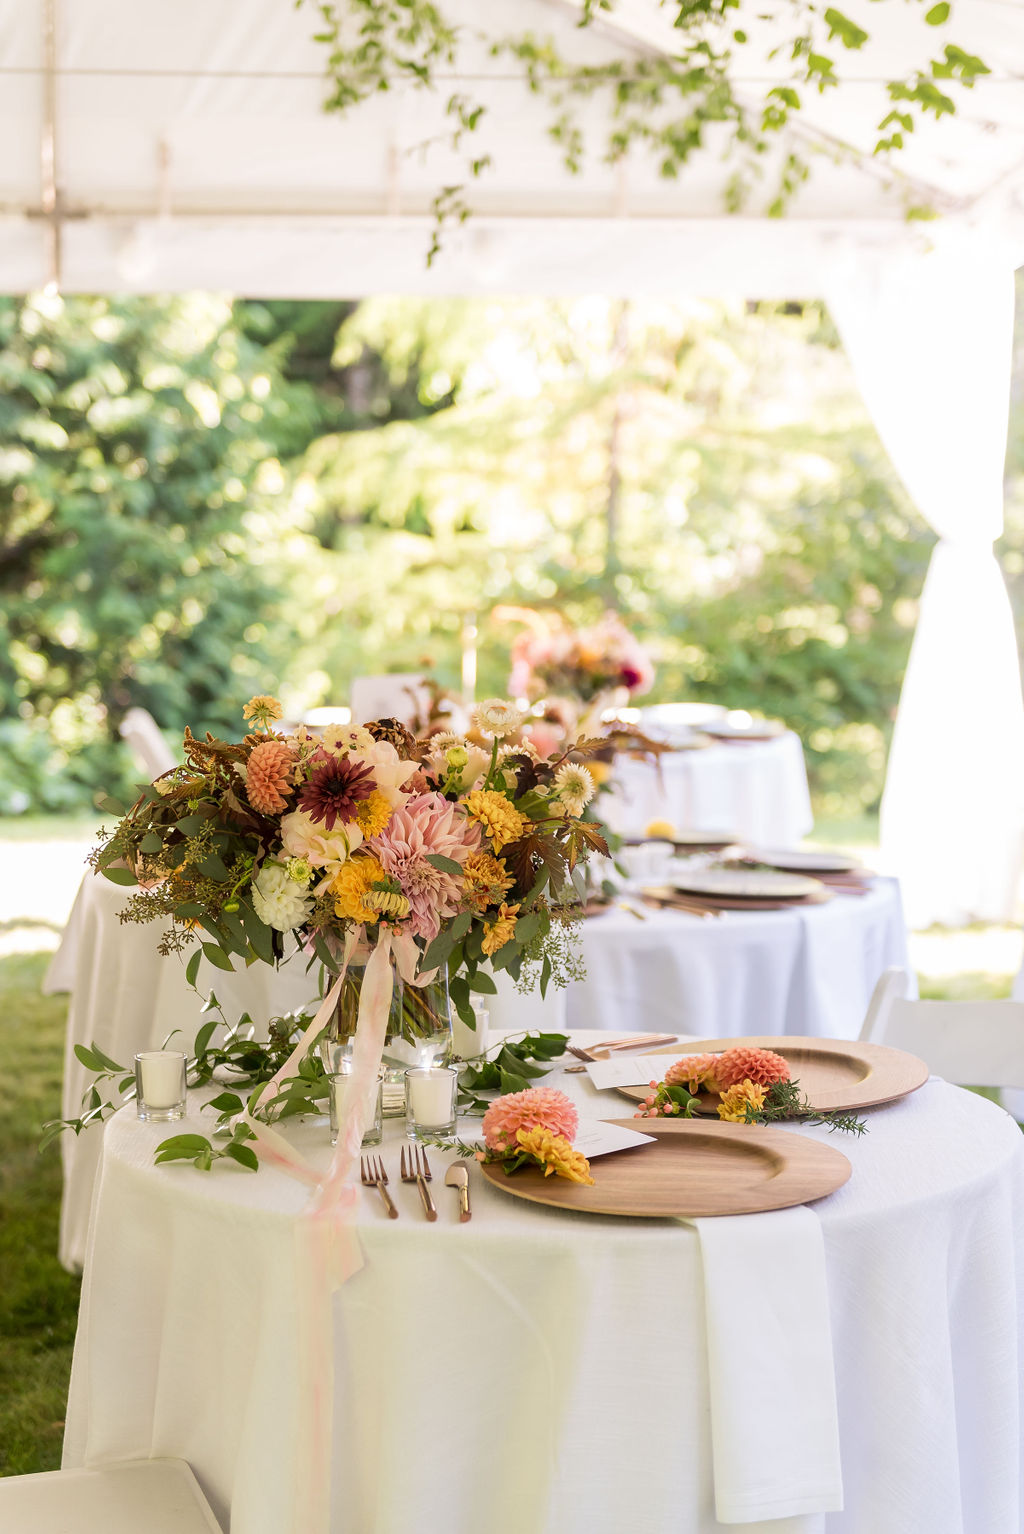 Tented wedding reception with florals on table